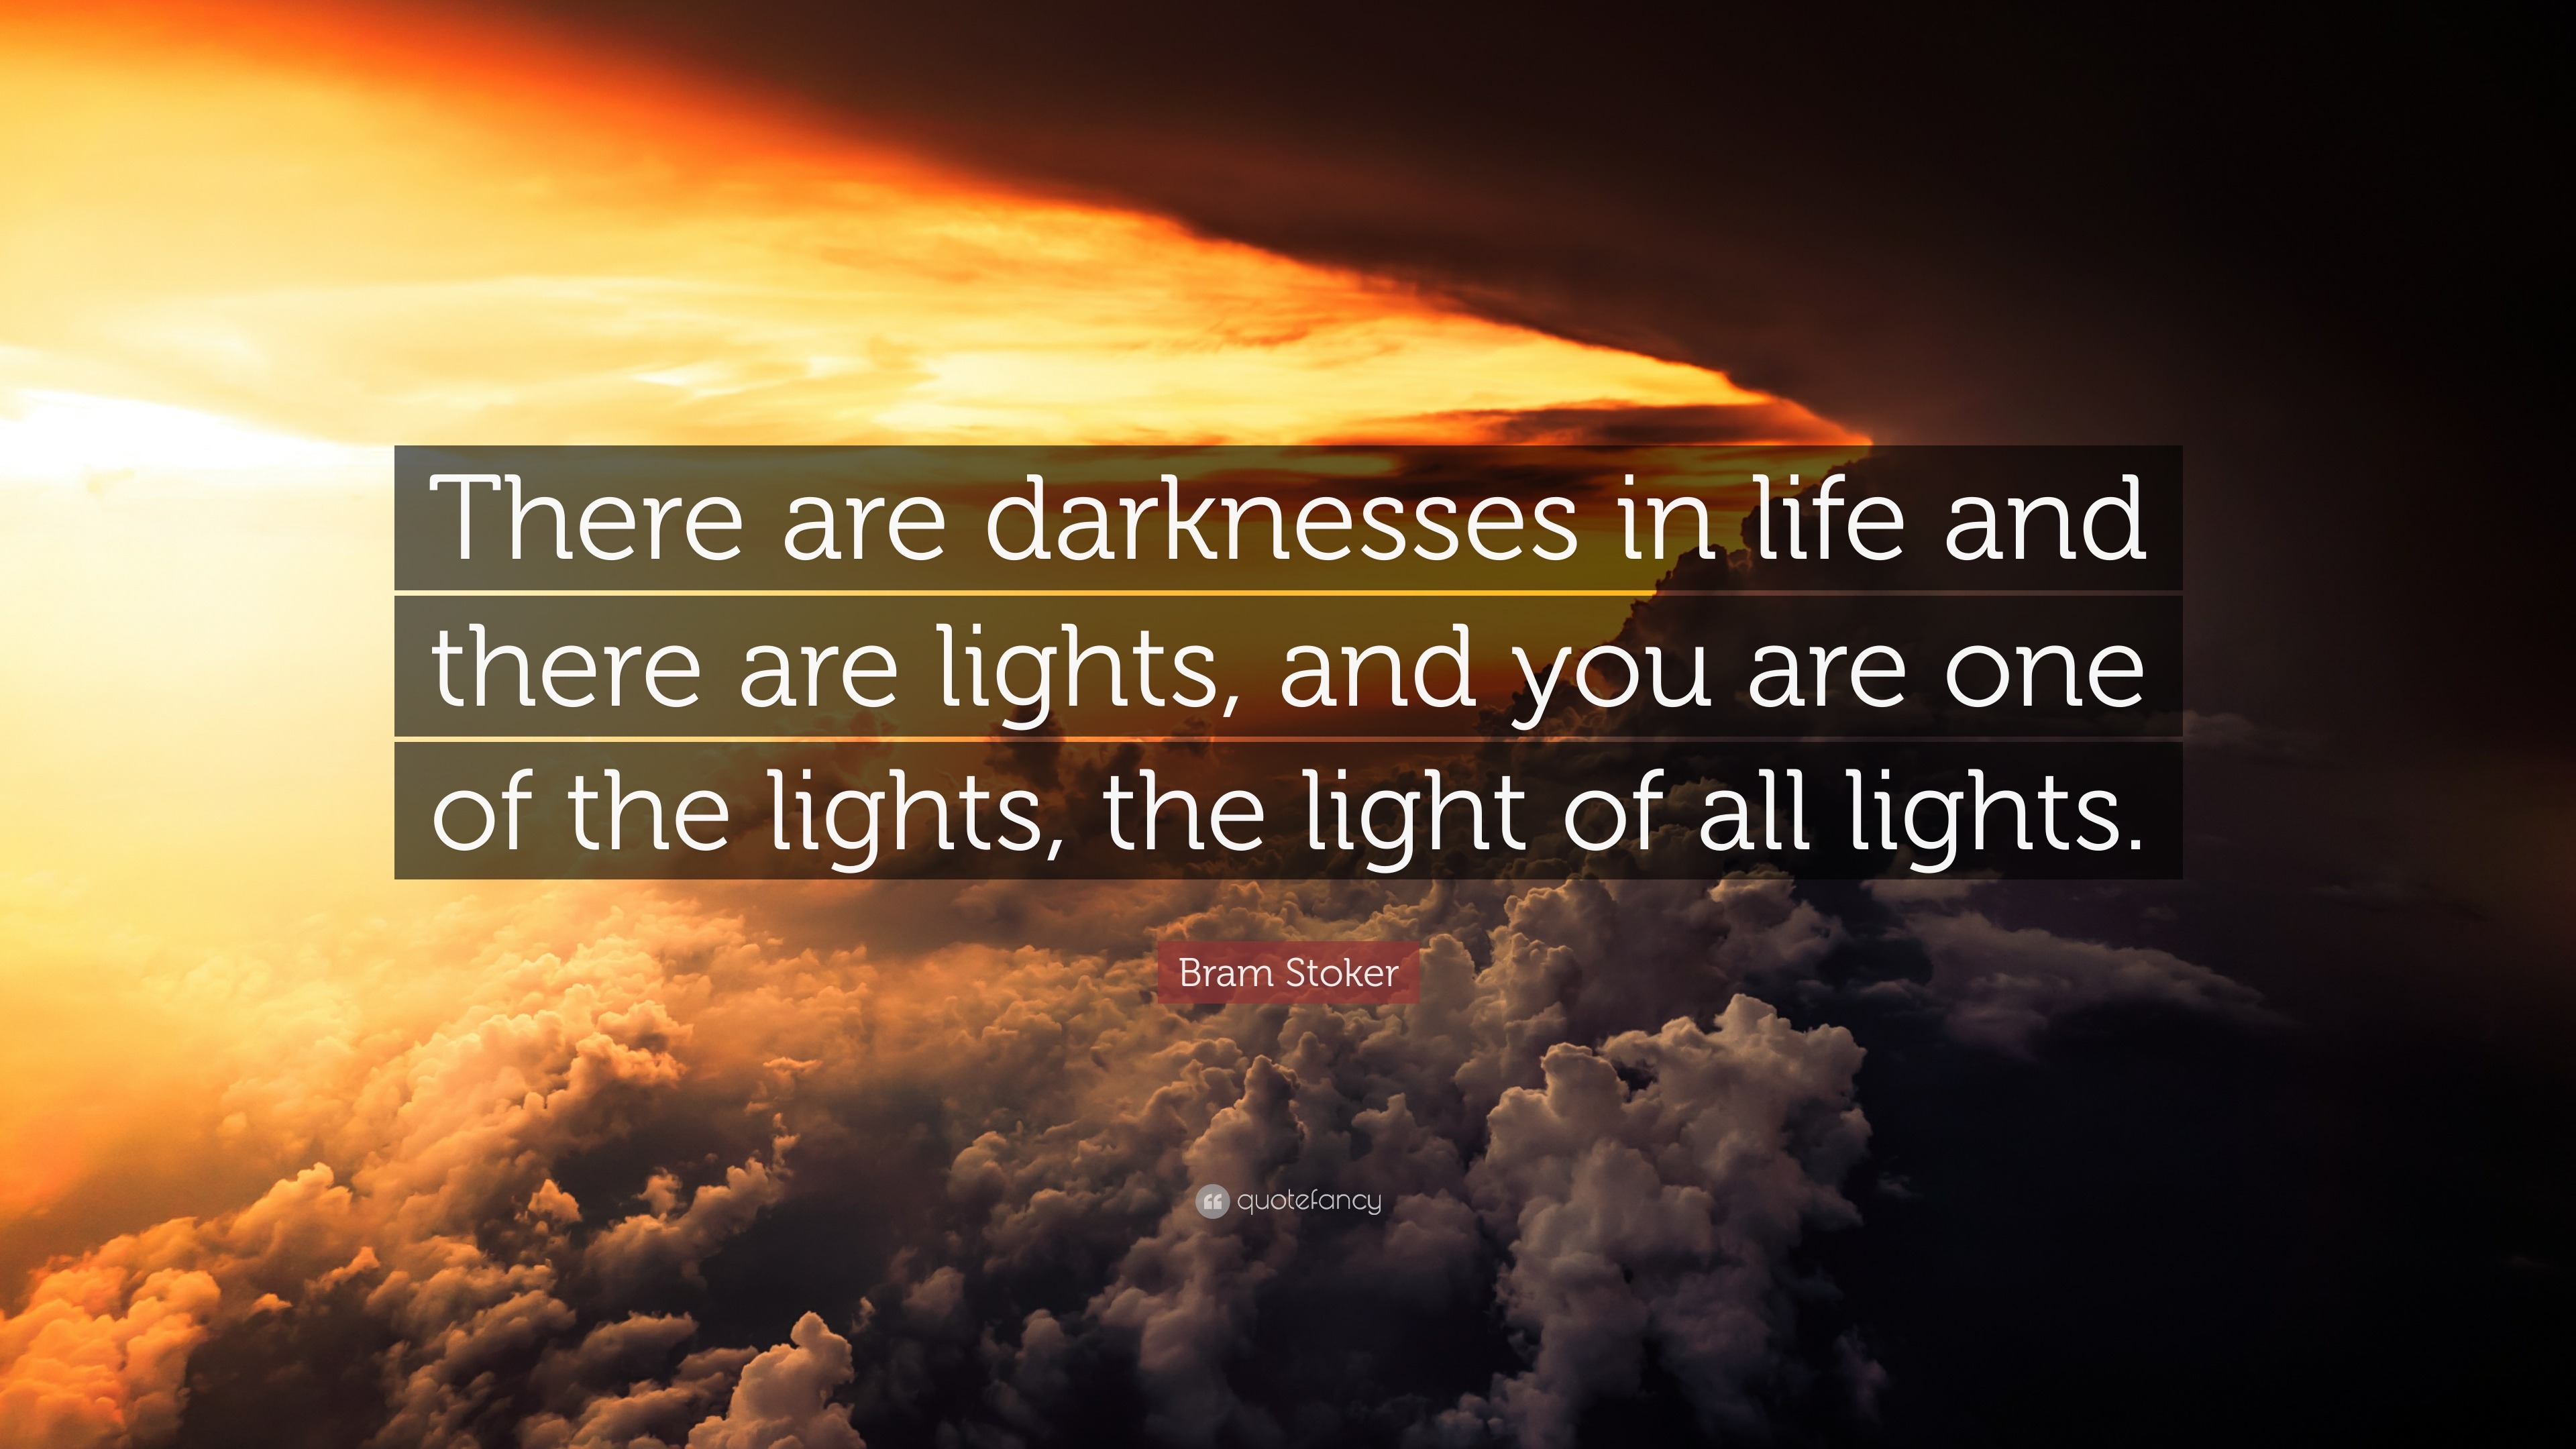 Bram Stoker Quote: “There are darknesses in life and there are lights ...